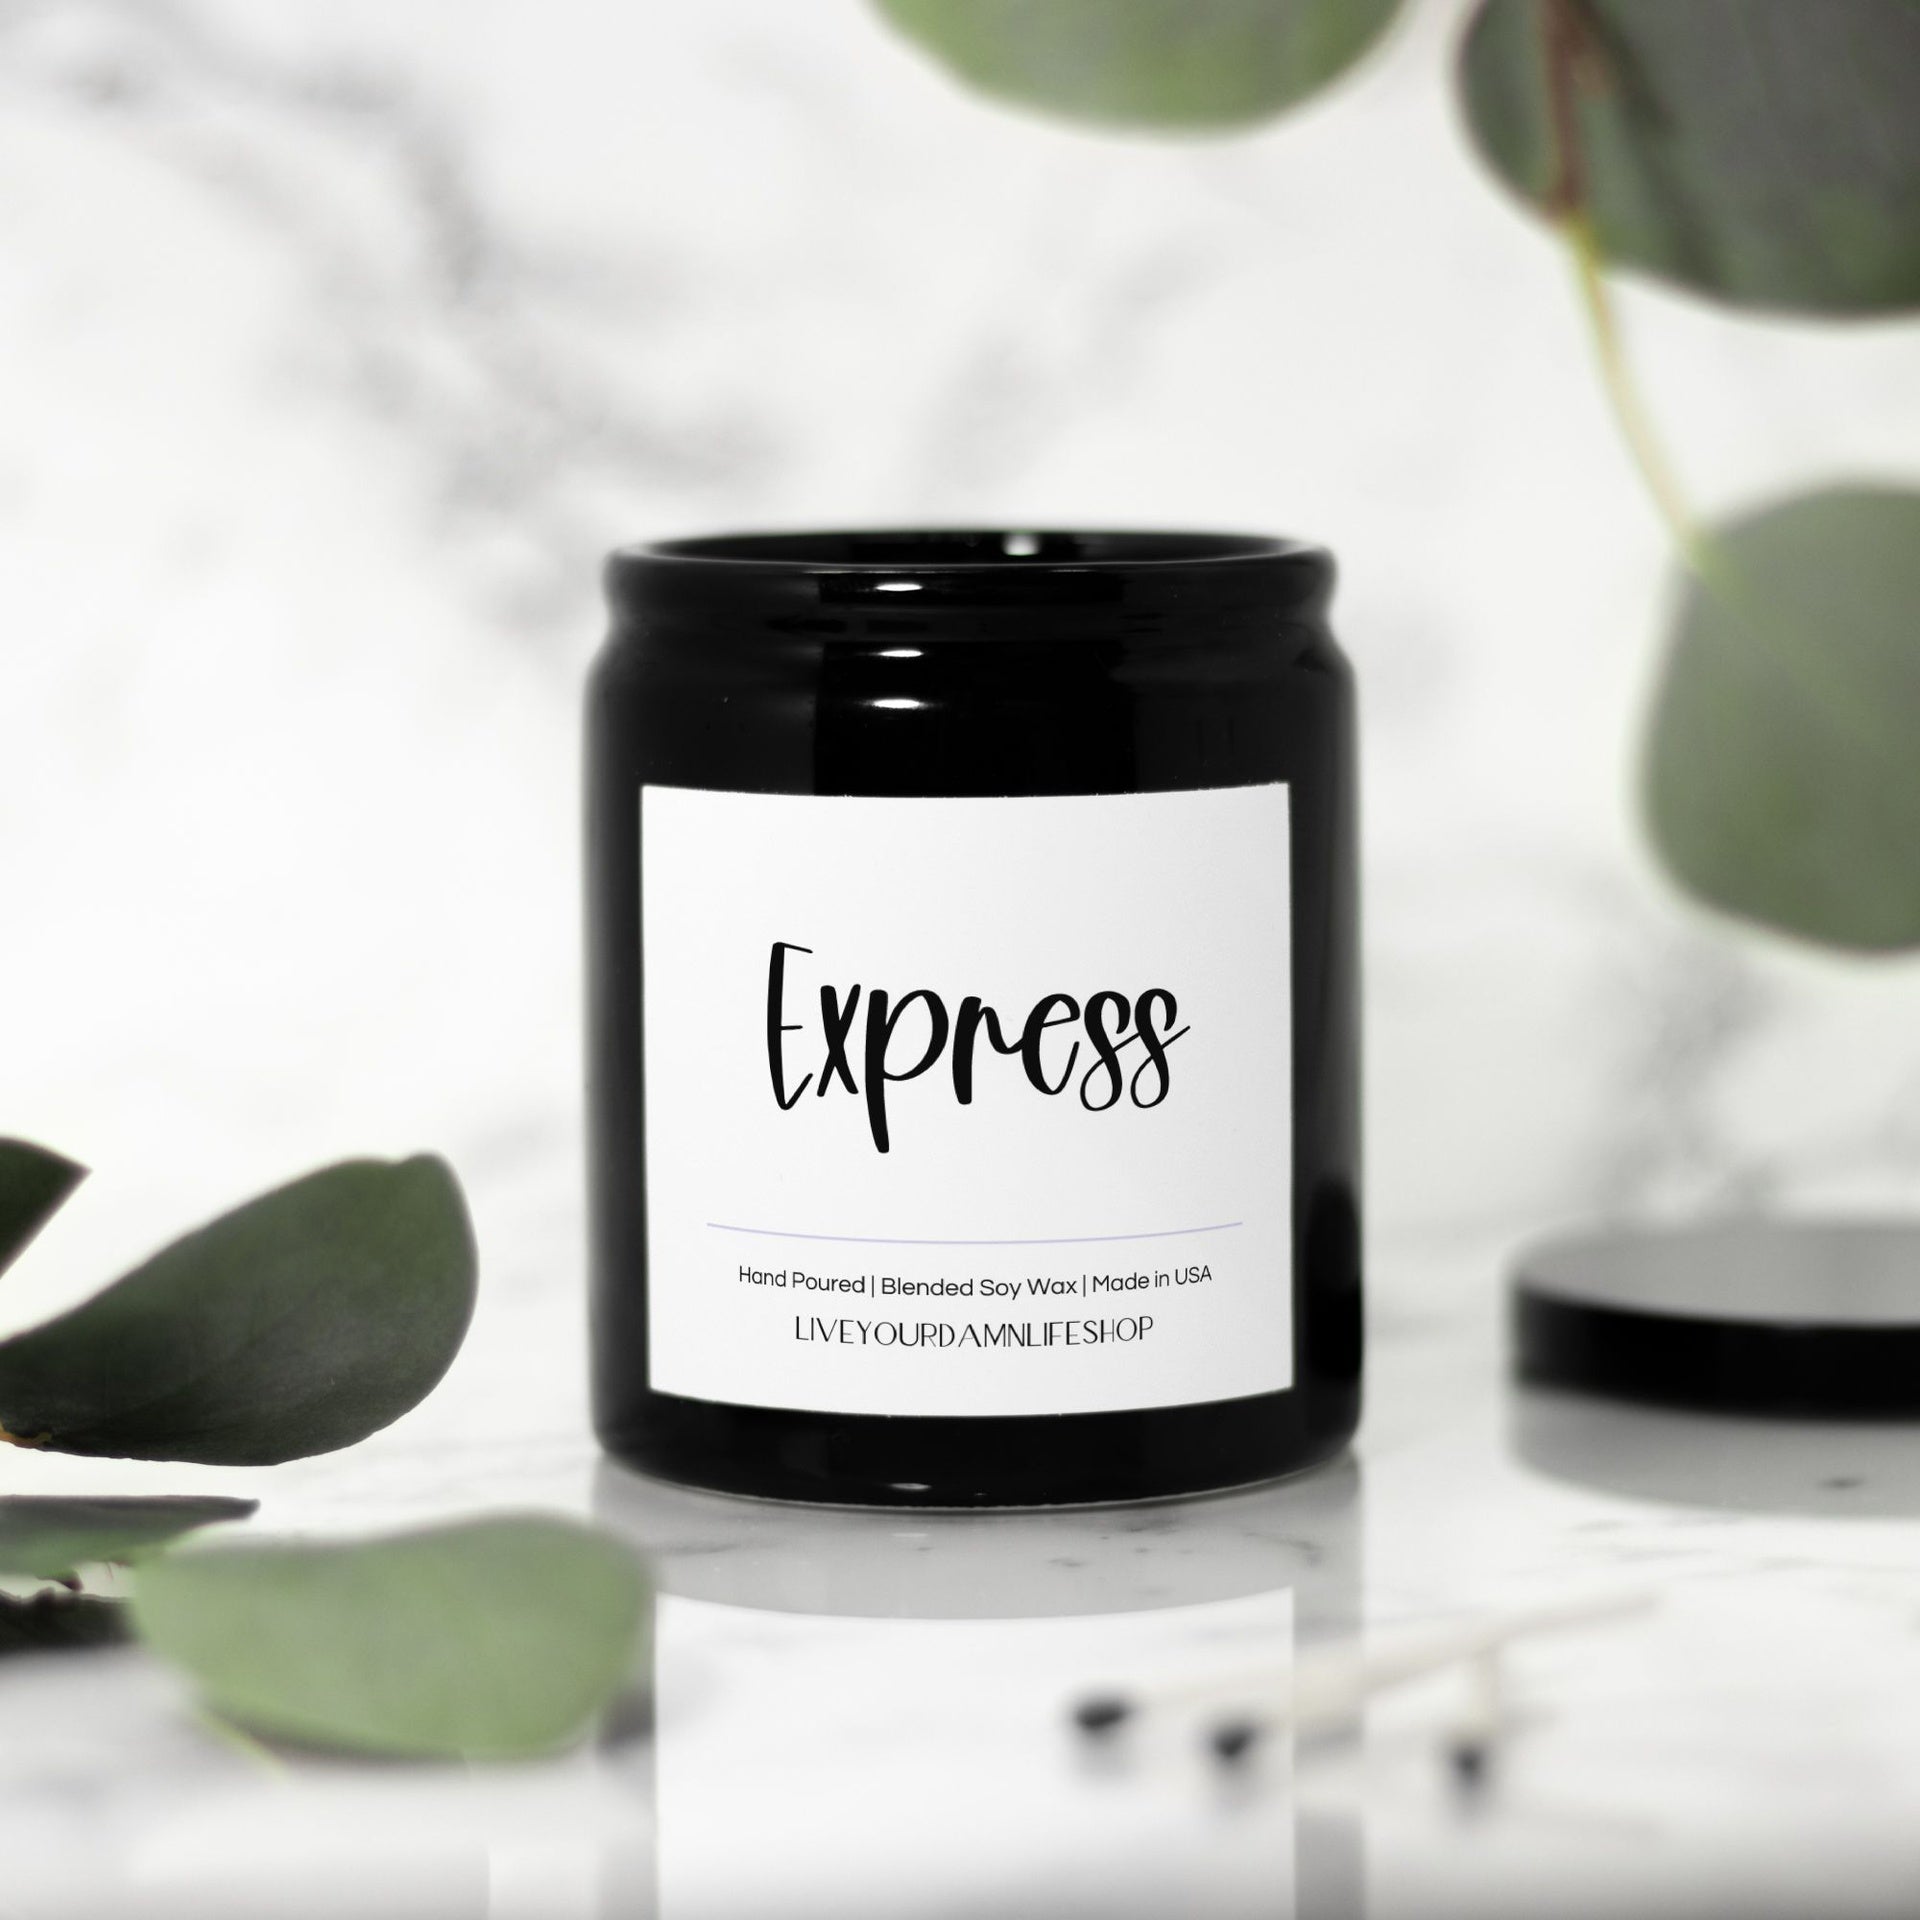 Express Word of the Year Ceramic Candle